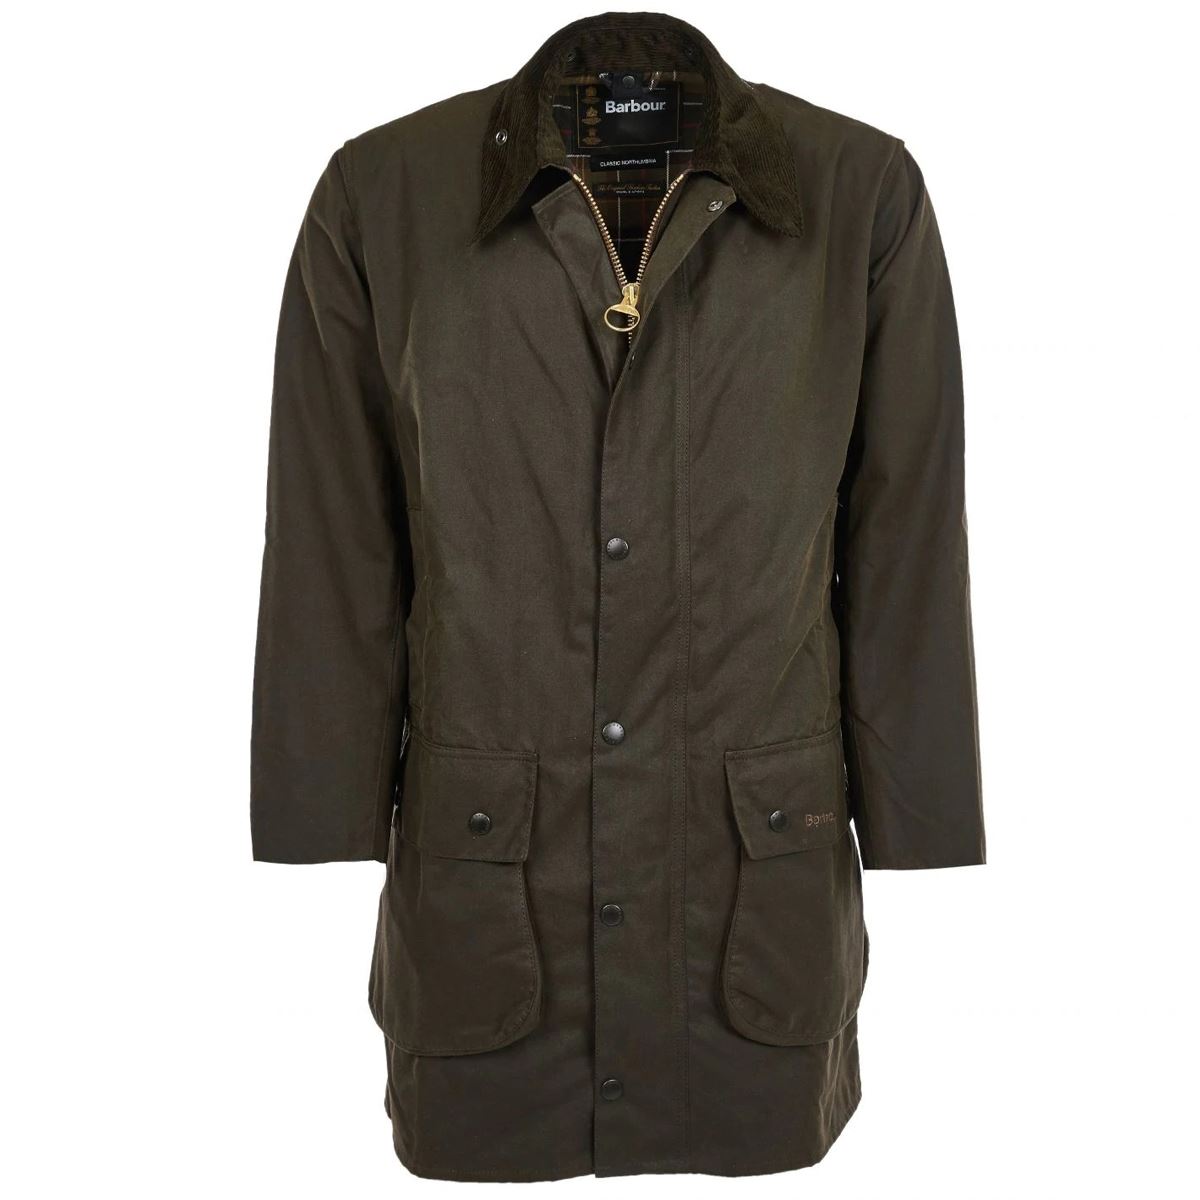 What are the key aspects of the Barbour Northumbria wax jacket?